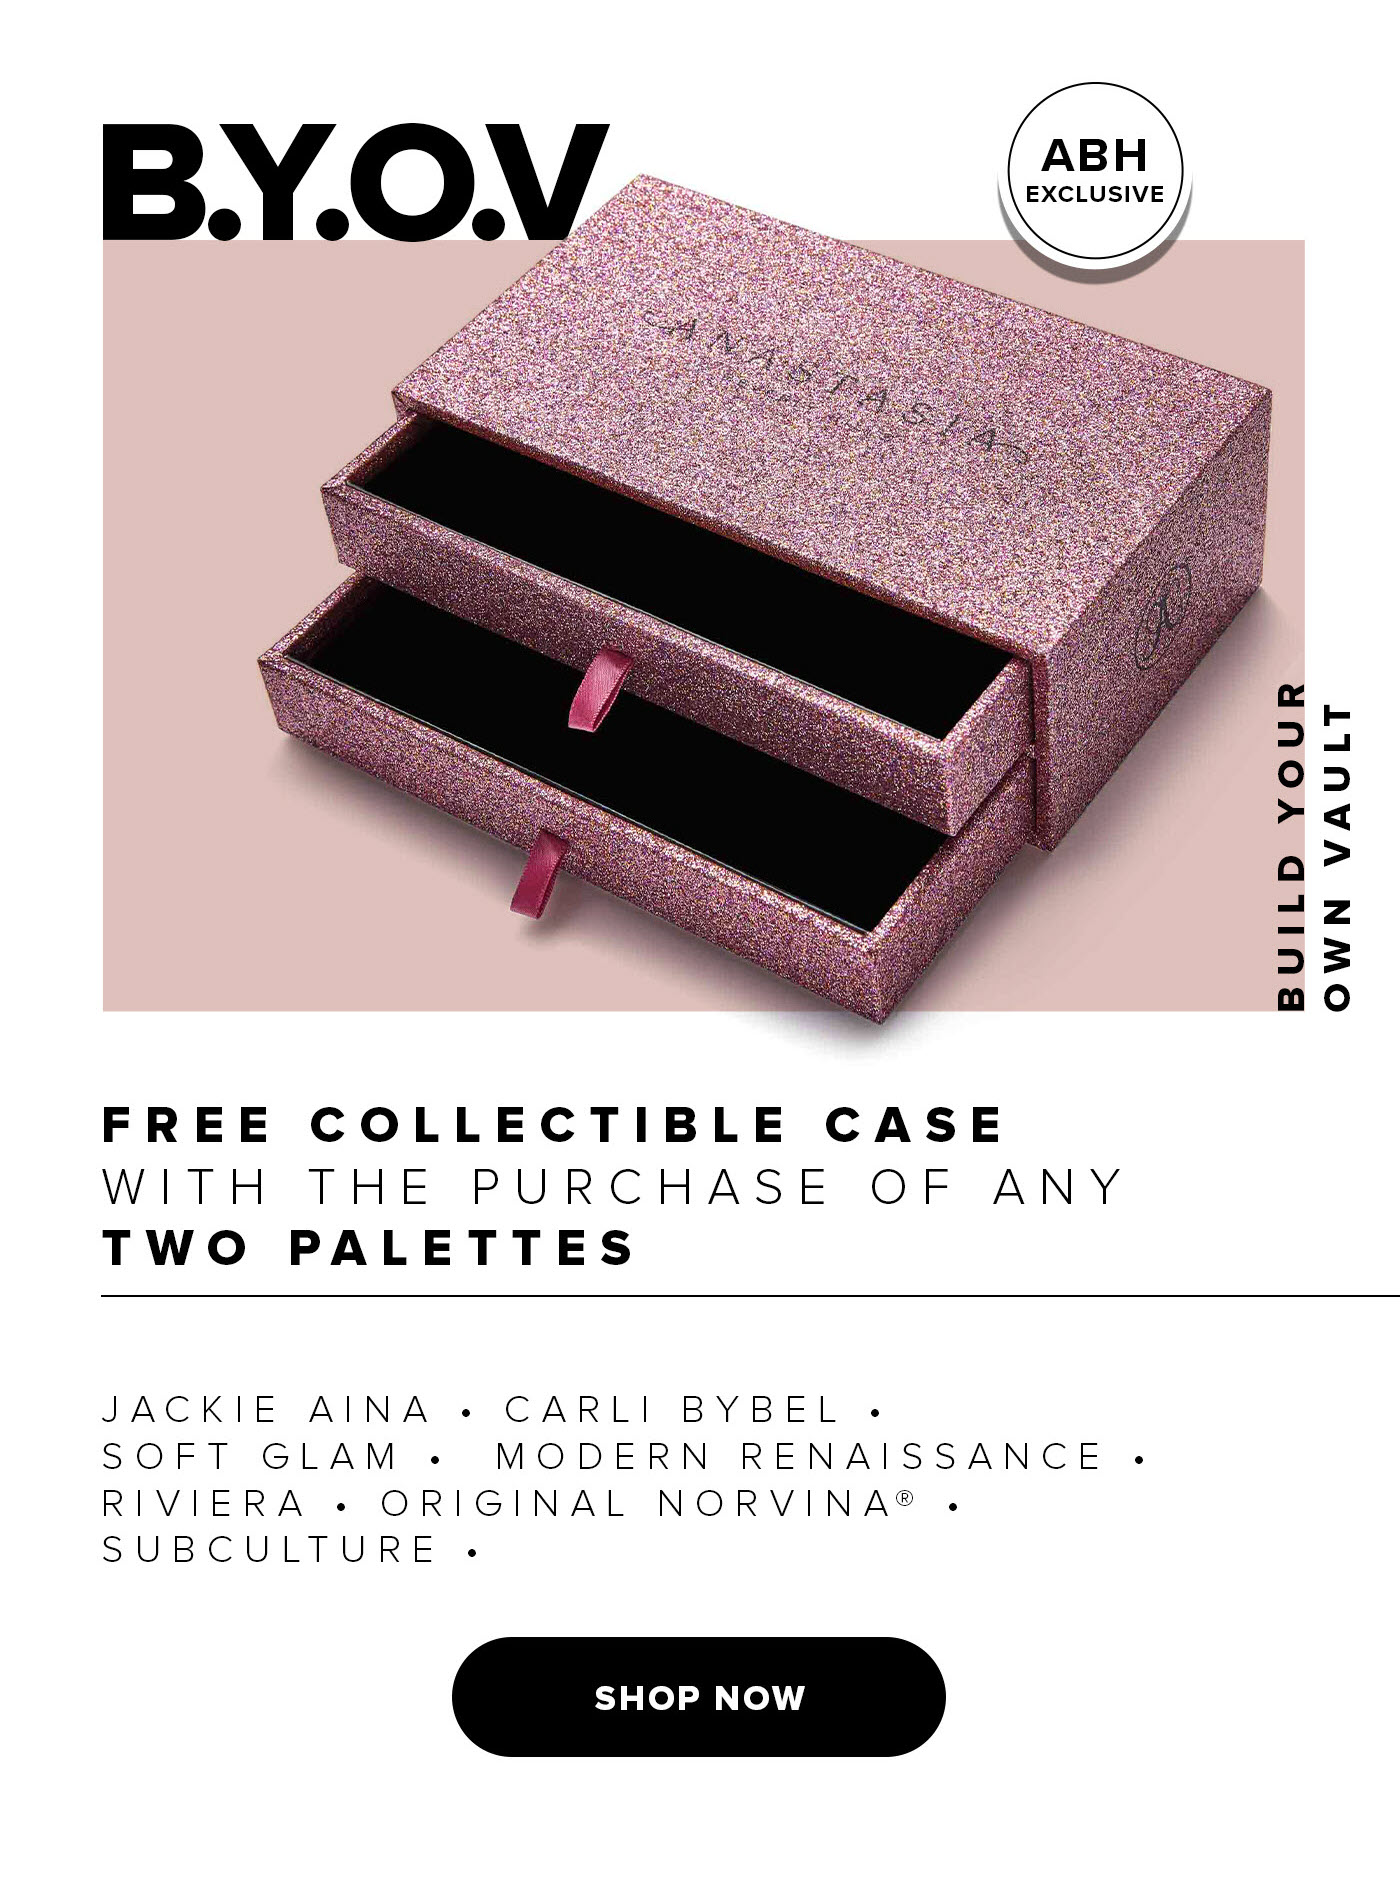 Build Your Own Vault - Free Collectible Case with the Purchase of Any Two Palettes